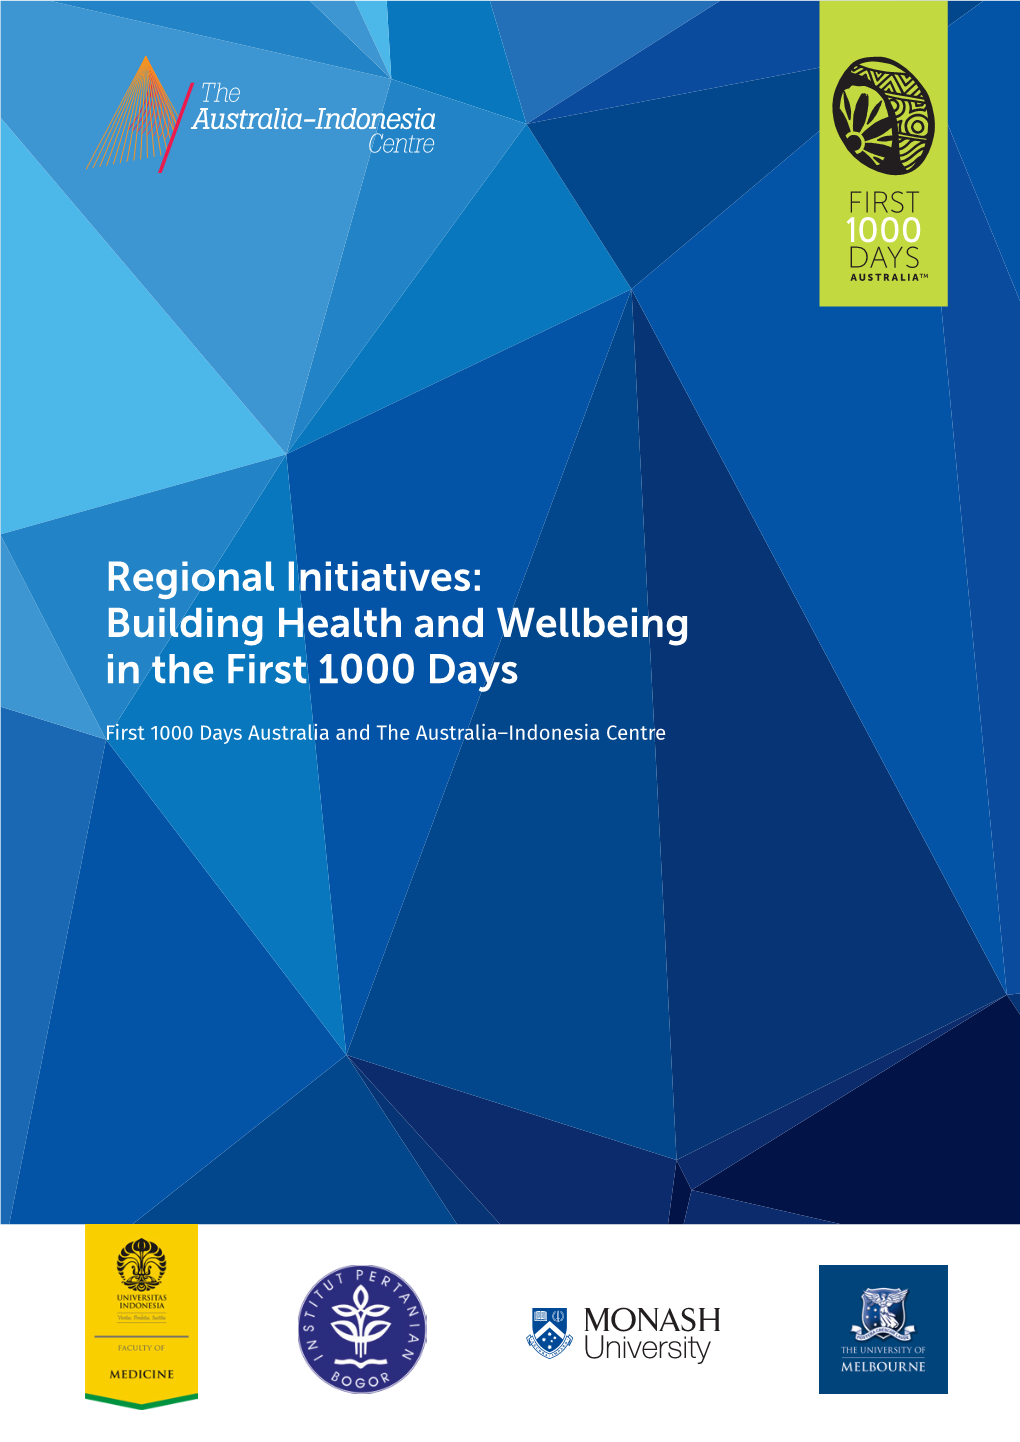 Regional Initiatives: Building Health and Wellbeing in the First 1000 Days